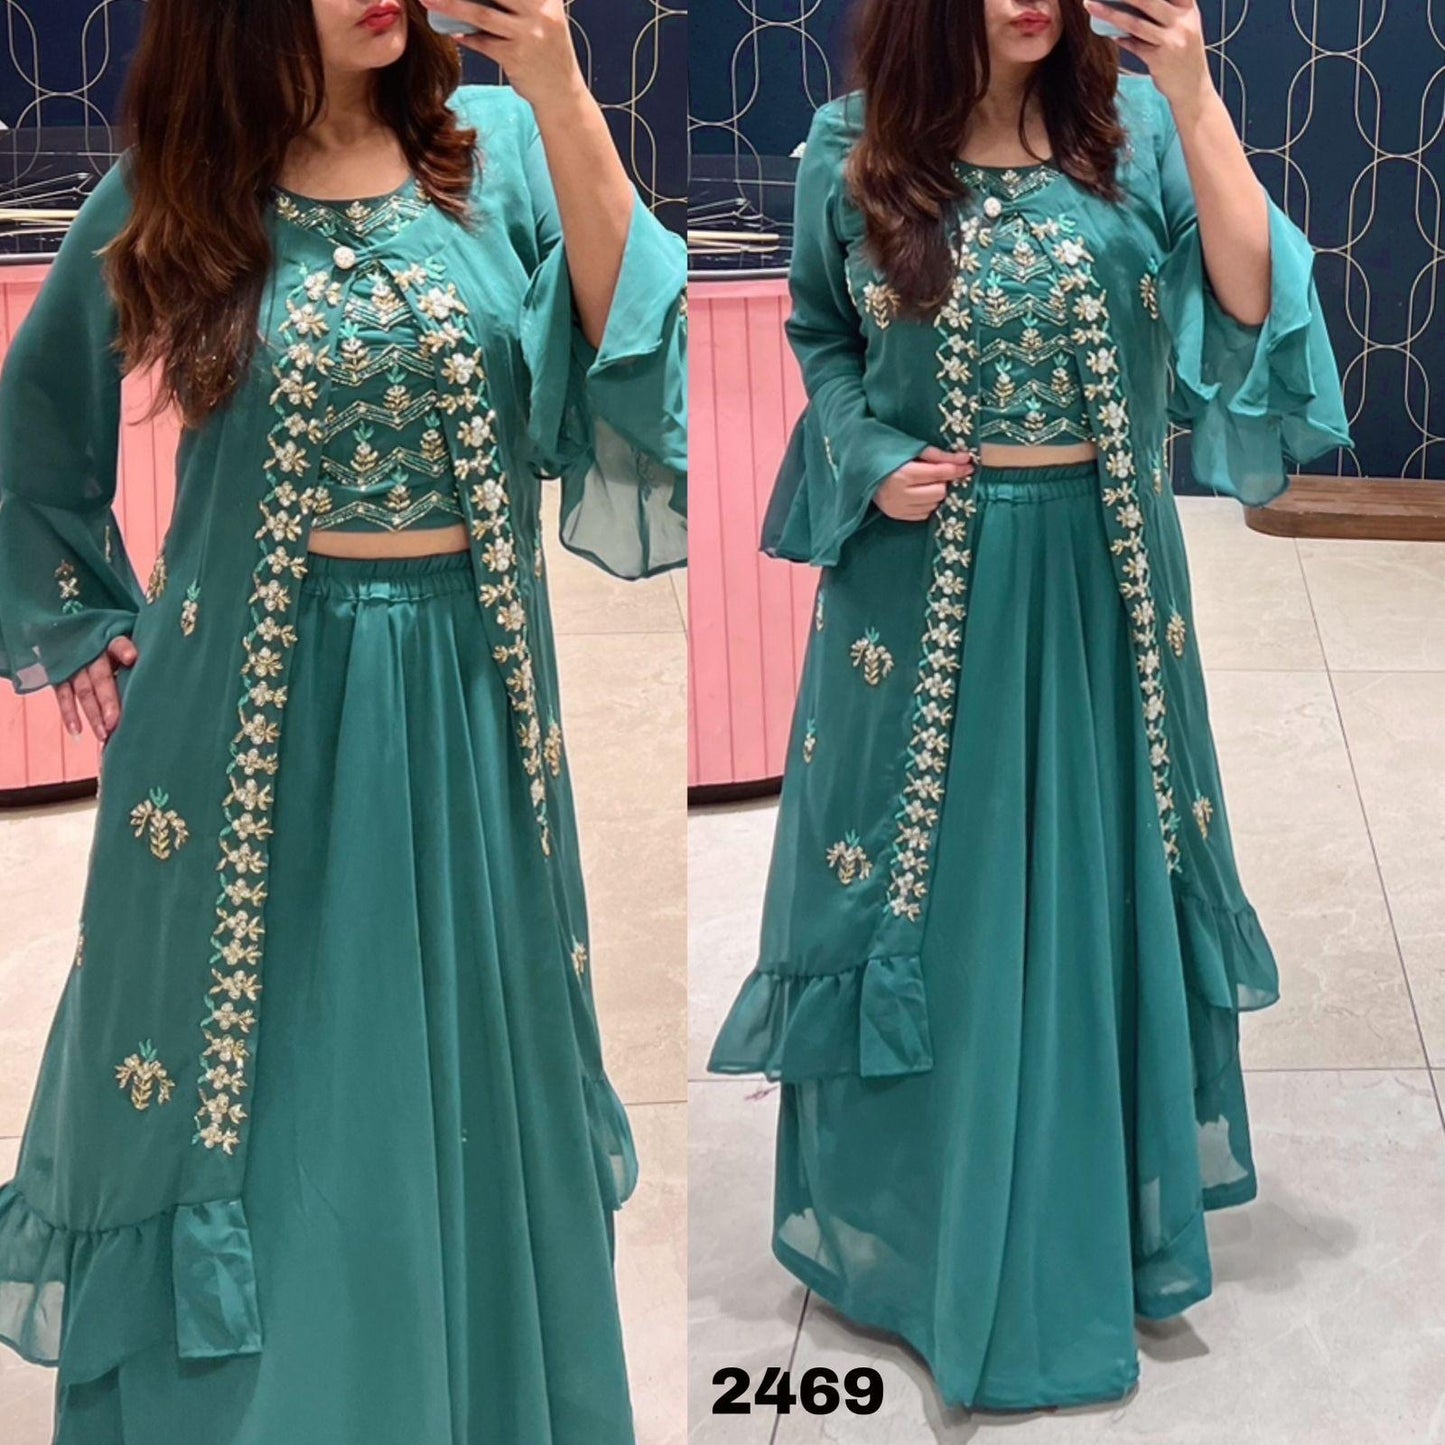 Turquoise Blue Georgette Crop Top & Kurti with Beautiful Handwork Embroidery Shopping Online - Inayakhan Shop 